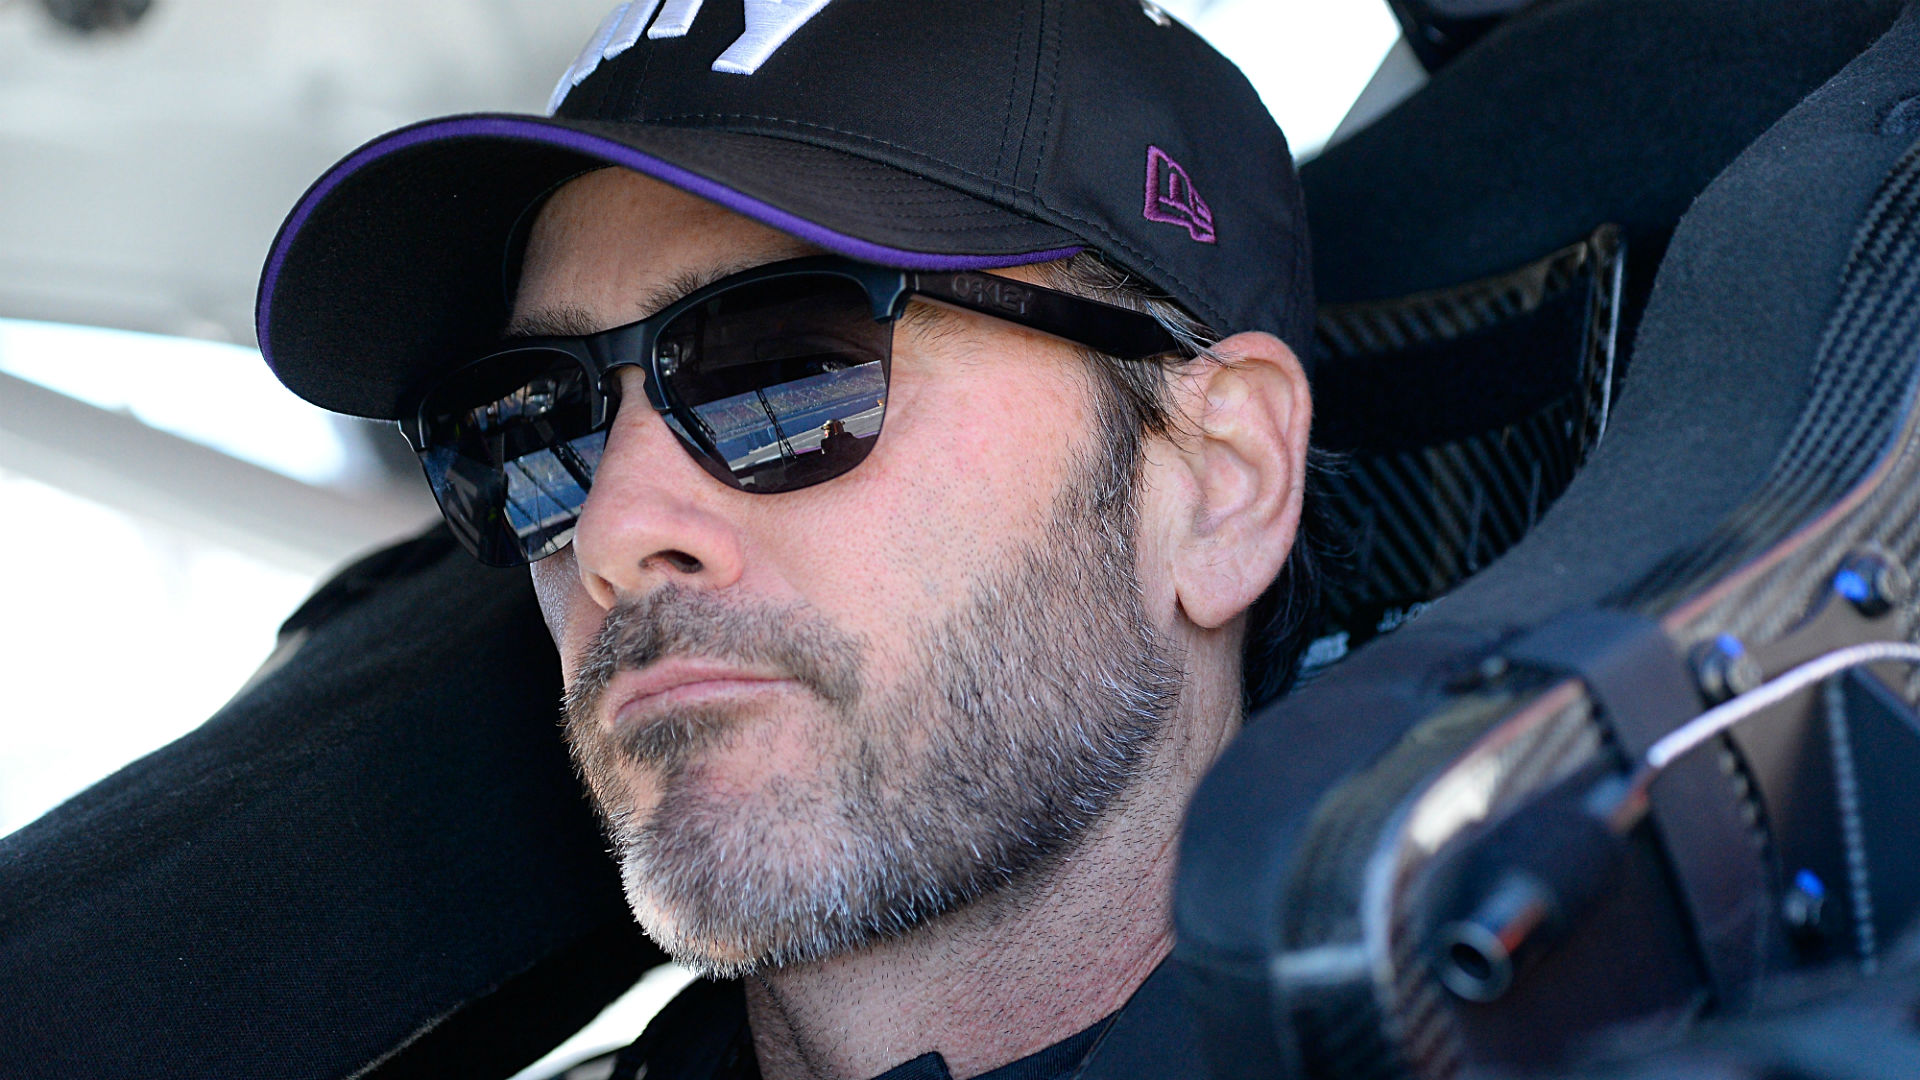 Nascar At California Jimmie Johnson Says Enforcing Pit Road Speed